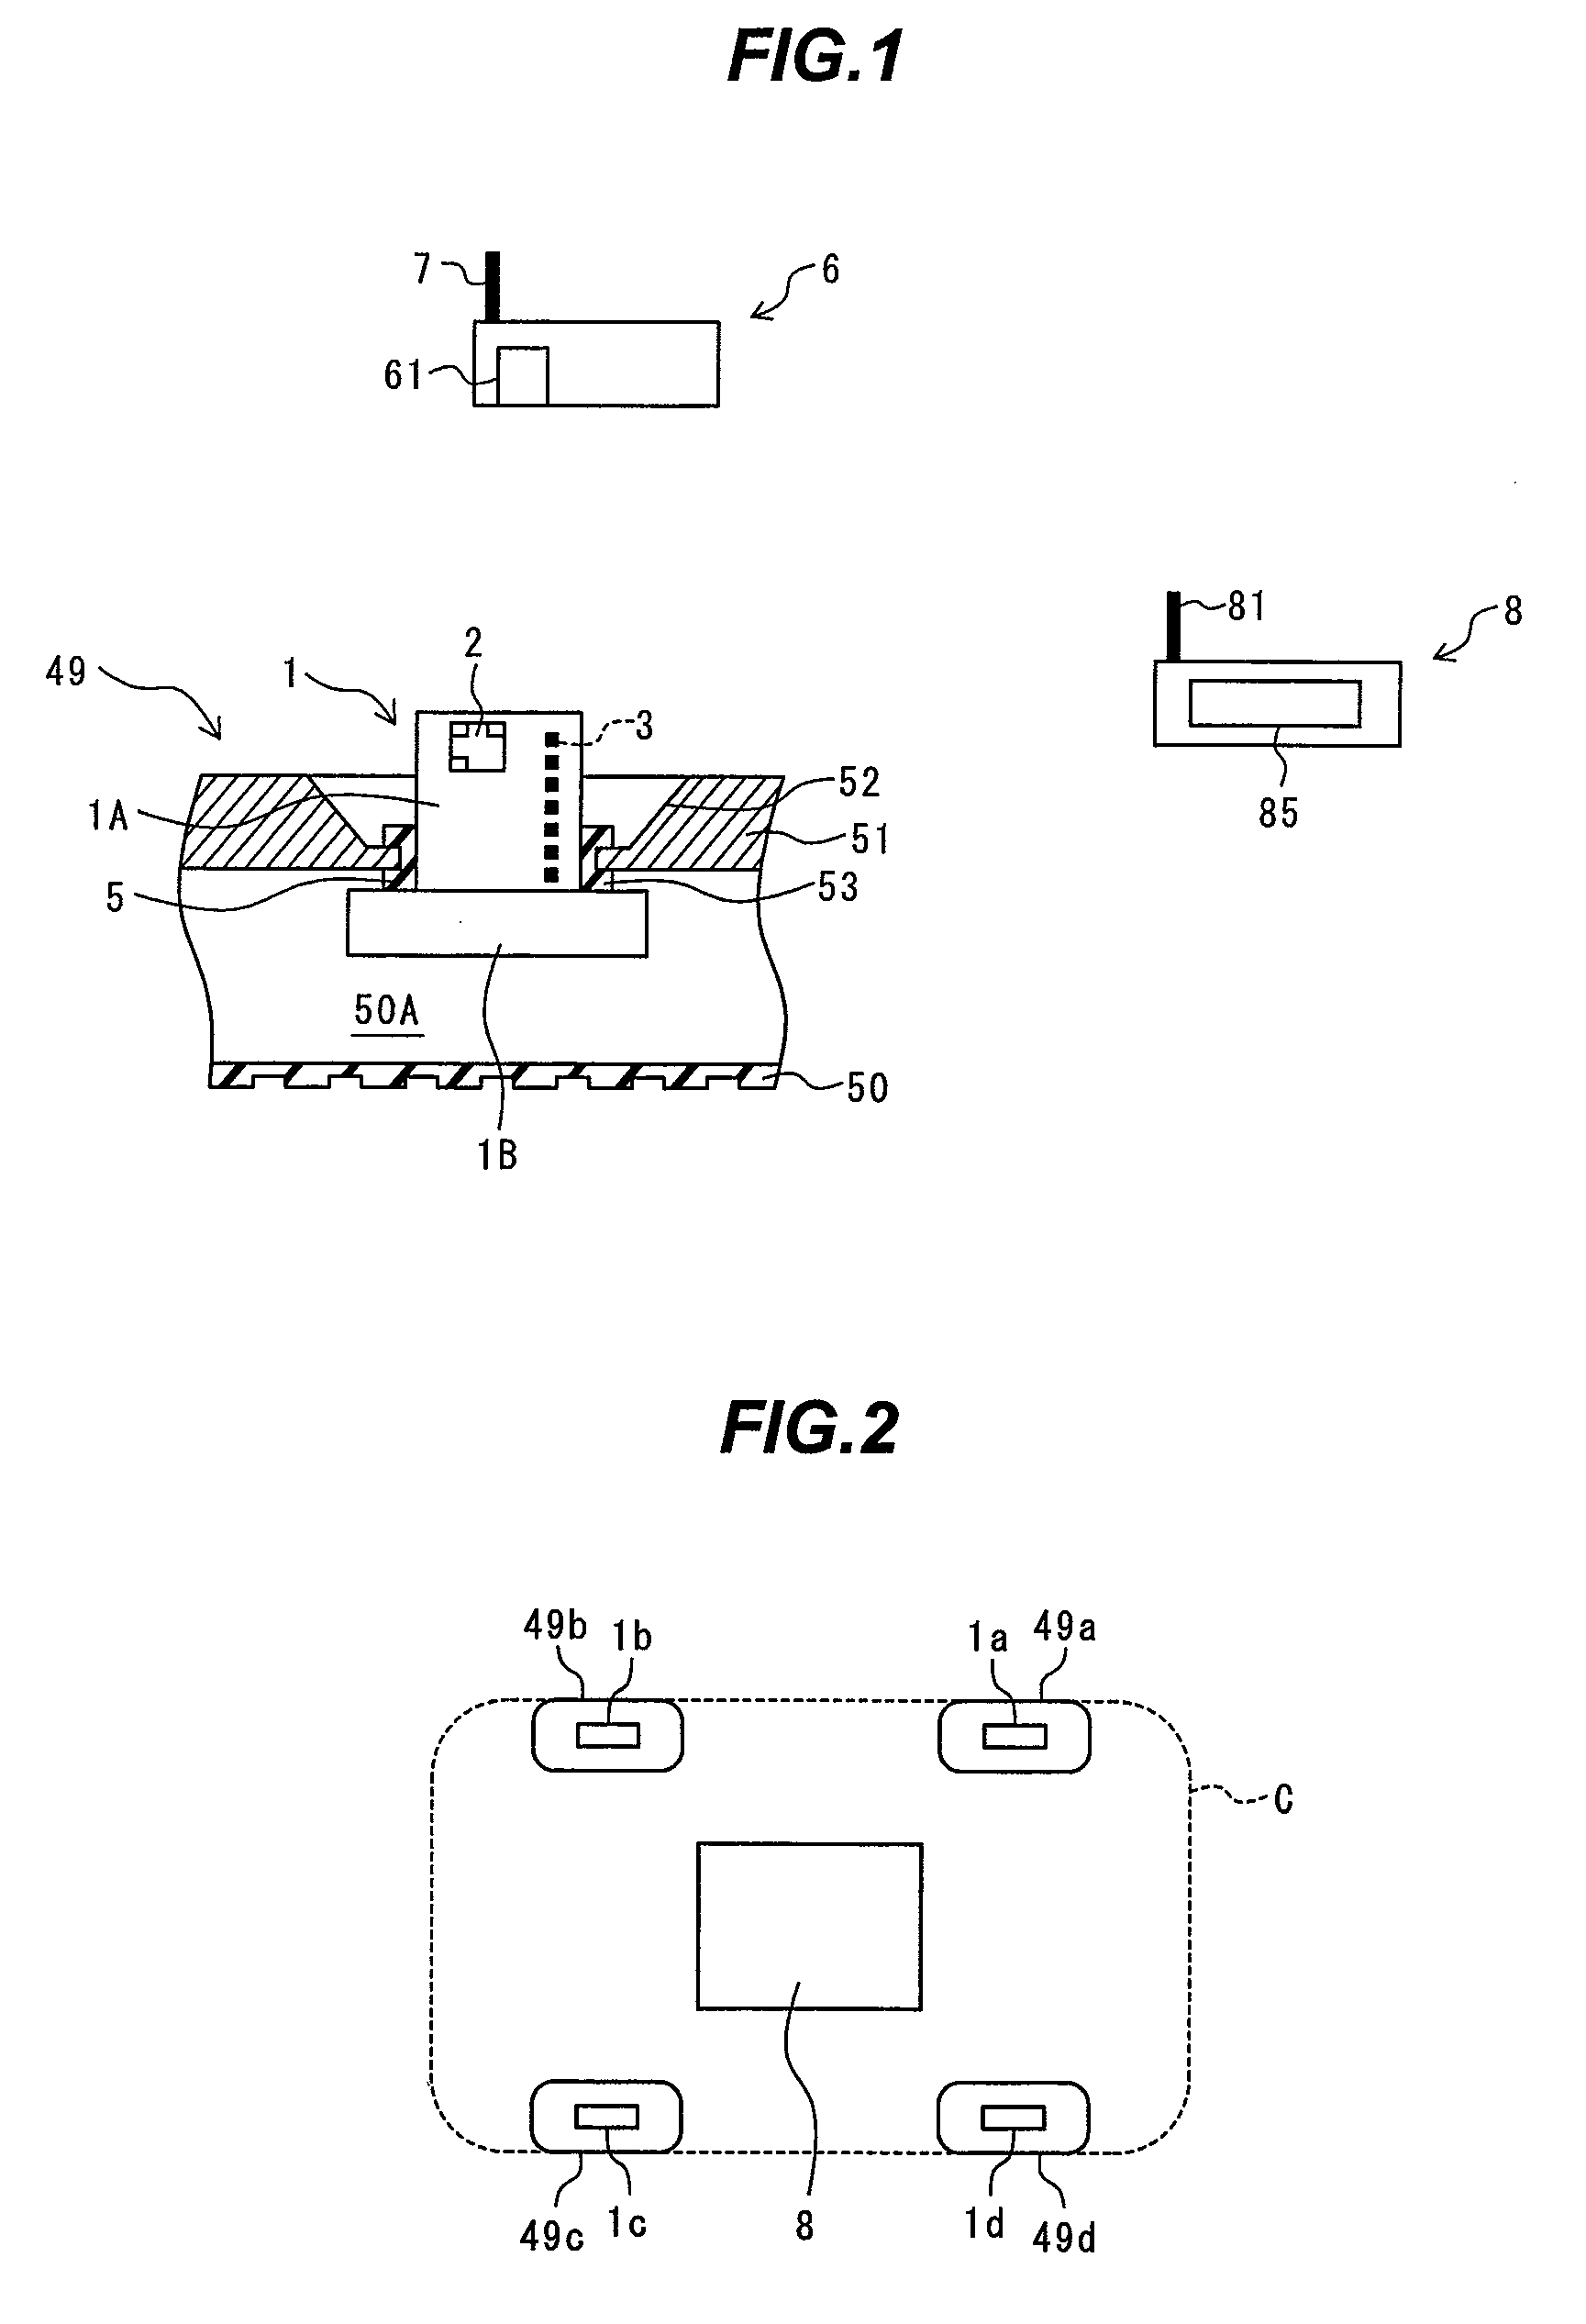 Pressure measuring module for detecting air pressure within a tire included in a wheel assembly attached to a vehicle body and tire pressure monitoring system